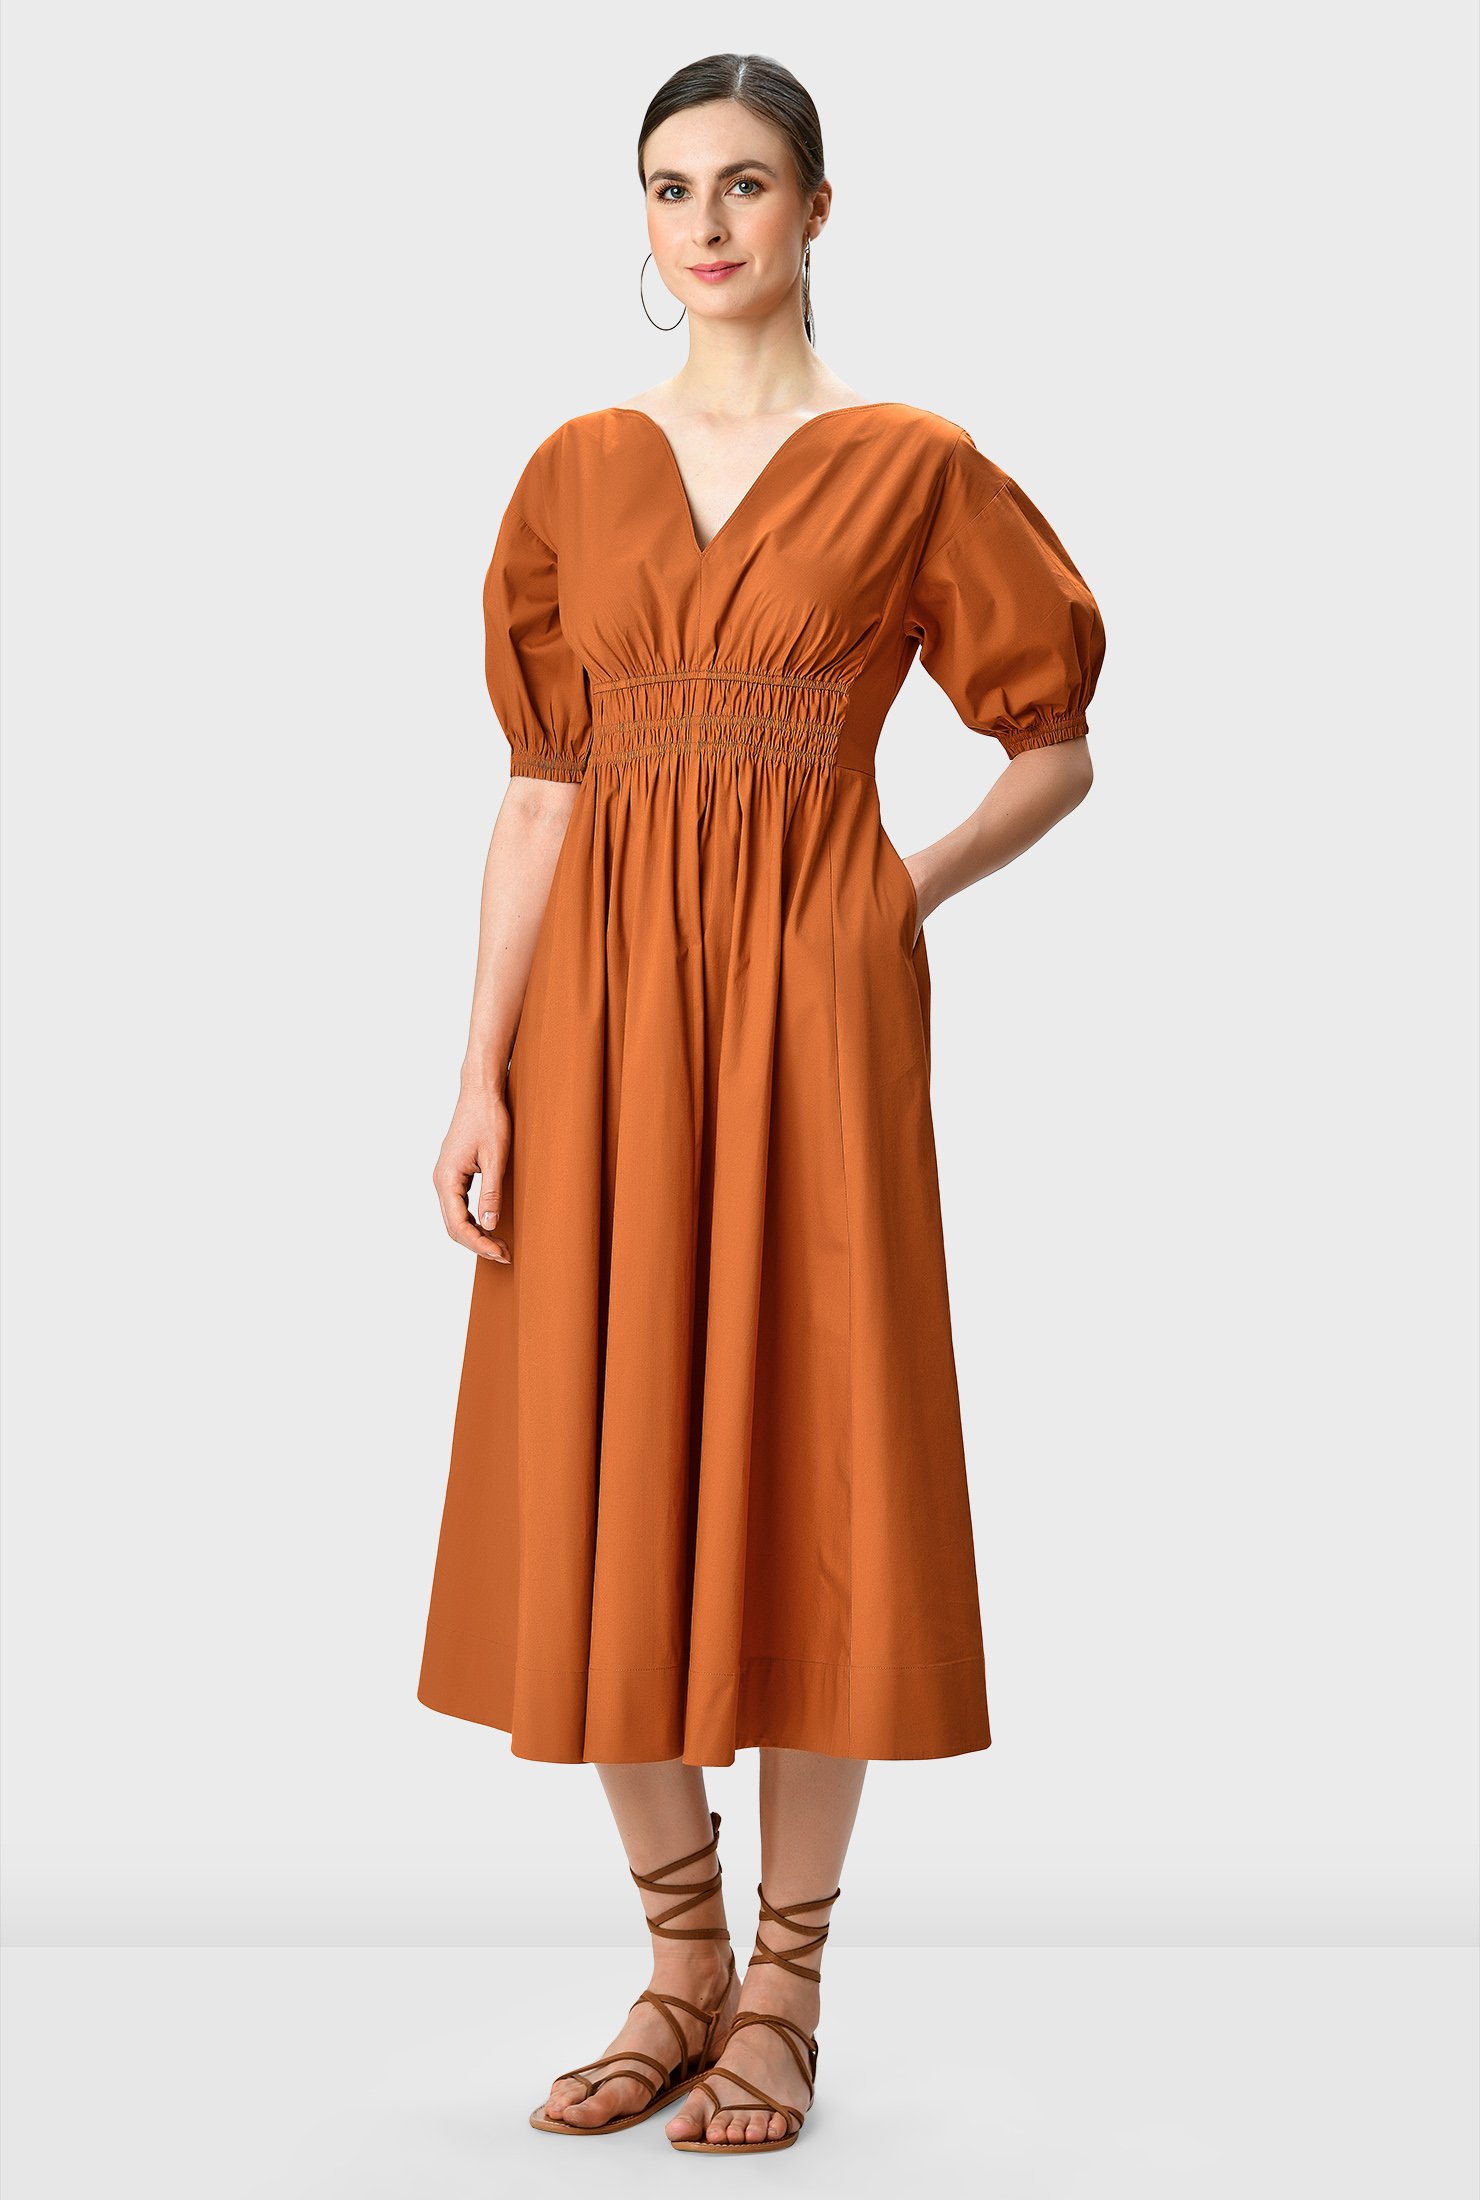 With its lightly voluminous silhouette, our cotton poplin dress is topped with a sweetheart neckline and cinched in at the shirred elastic waist.